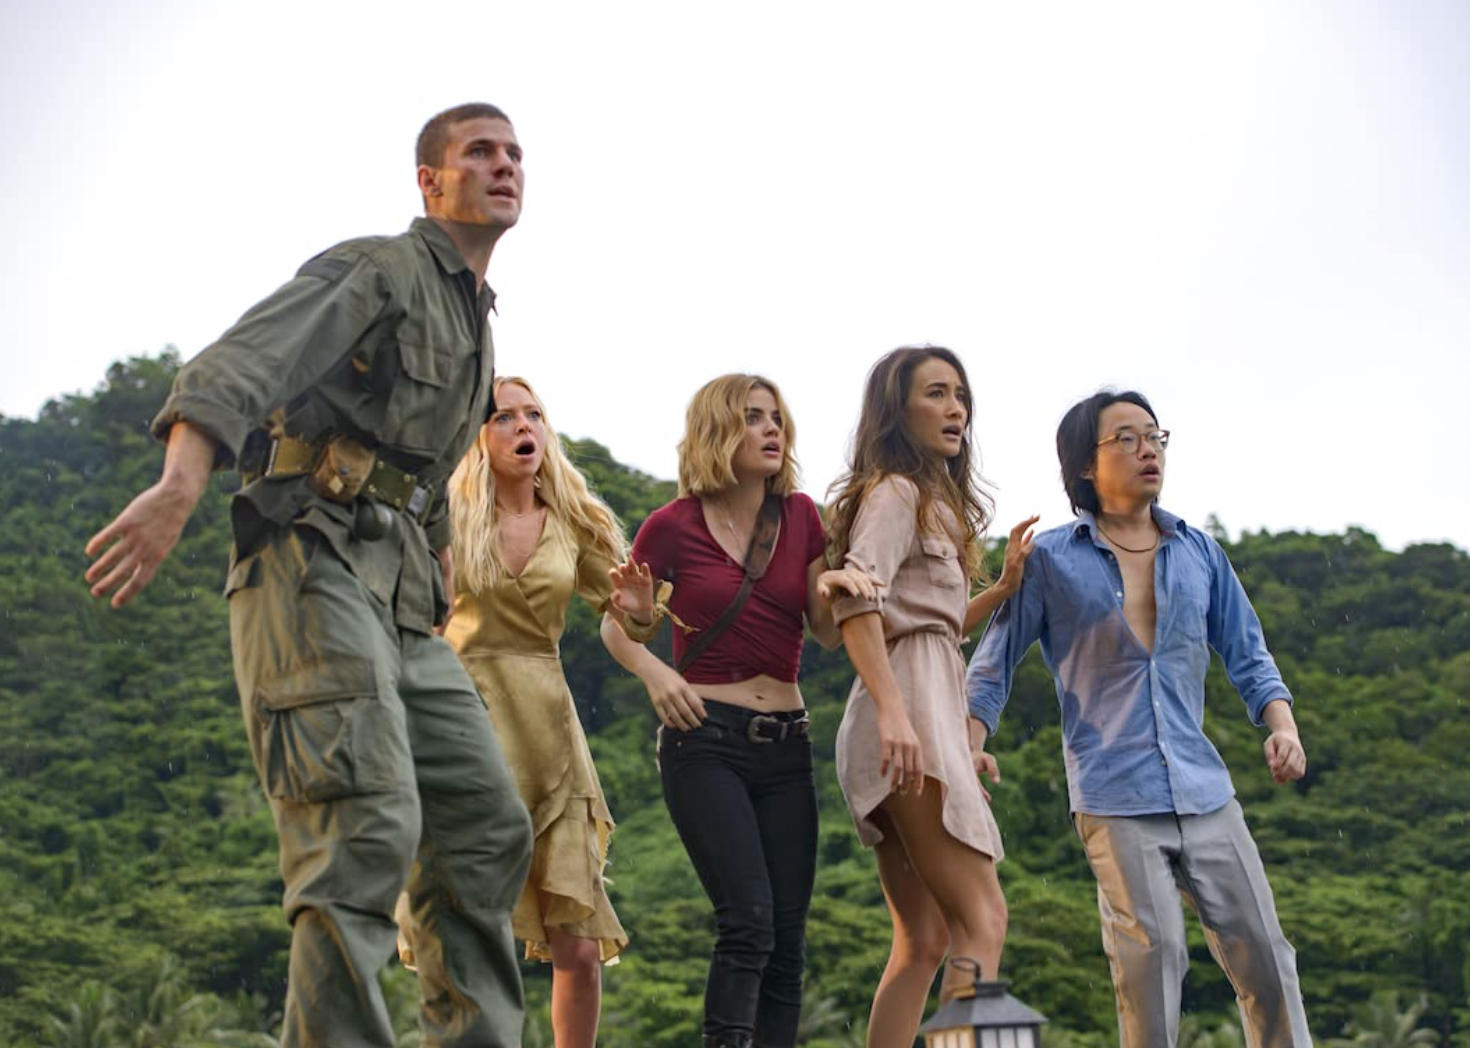 Portia Doubleday, Maggie Q, Lucy Hale, Austin Stowell, and Jimmy O. Yang in "Fantasy Island"